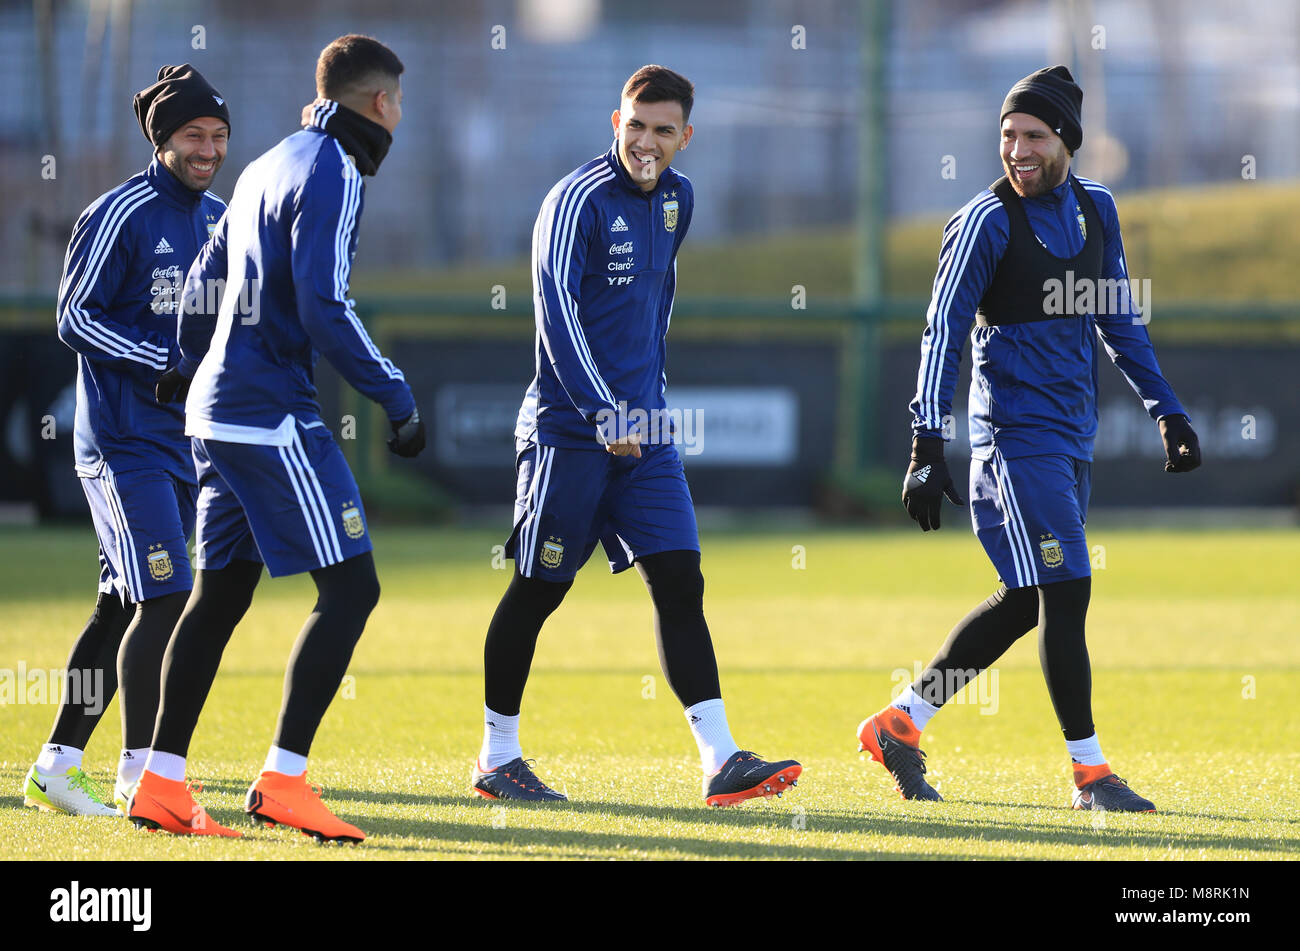 Argentina's Javier Mascherano (left) and Nicolas Otamendi (right) during a training session at the City Football Academy, Manchester. PRESS ASSOCIATION Photo. Picture date: Monday March 19, 2018. See PA story SOCCER Argentina. Photo credit should read: Simon Cooper/PA Wire Stock Photo